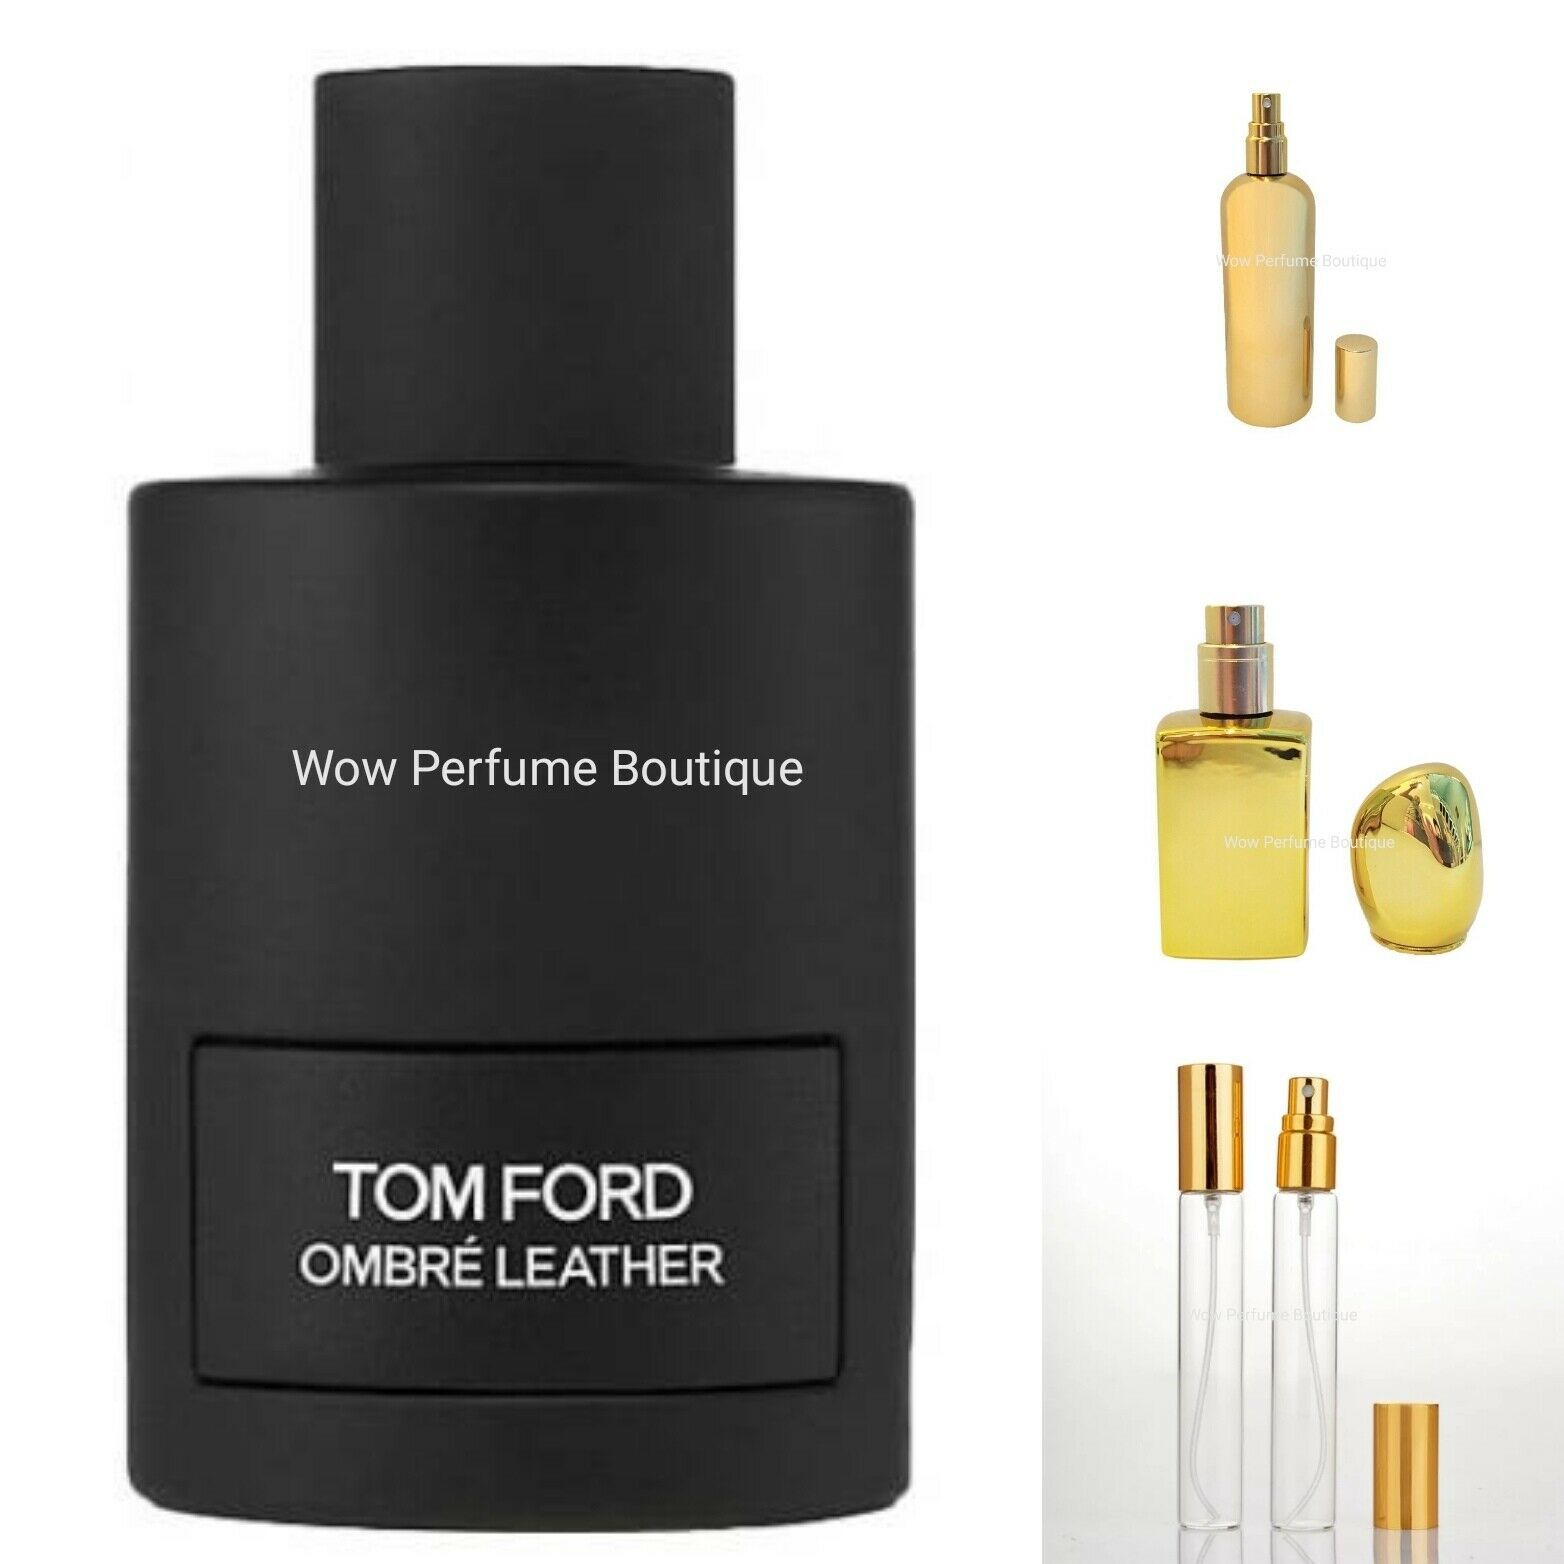 OMBRE LEATHER Tom Ford for women and men Decanted, choose your size!